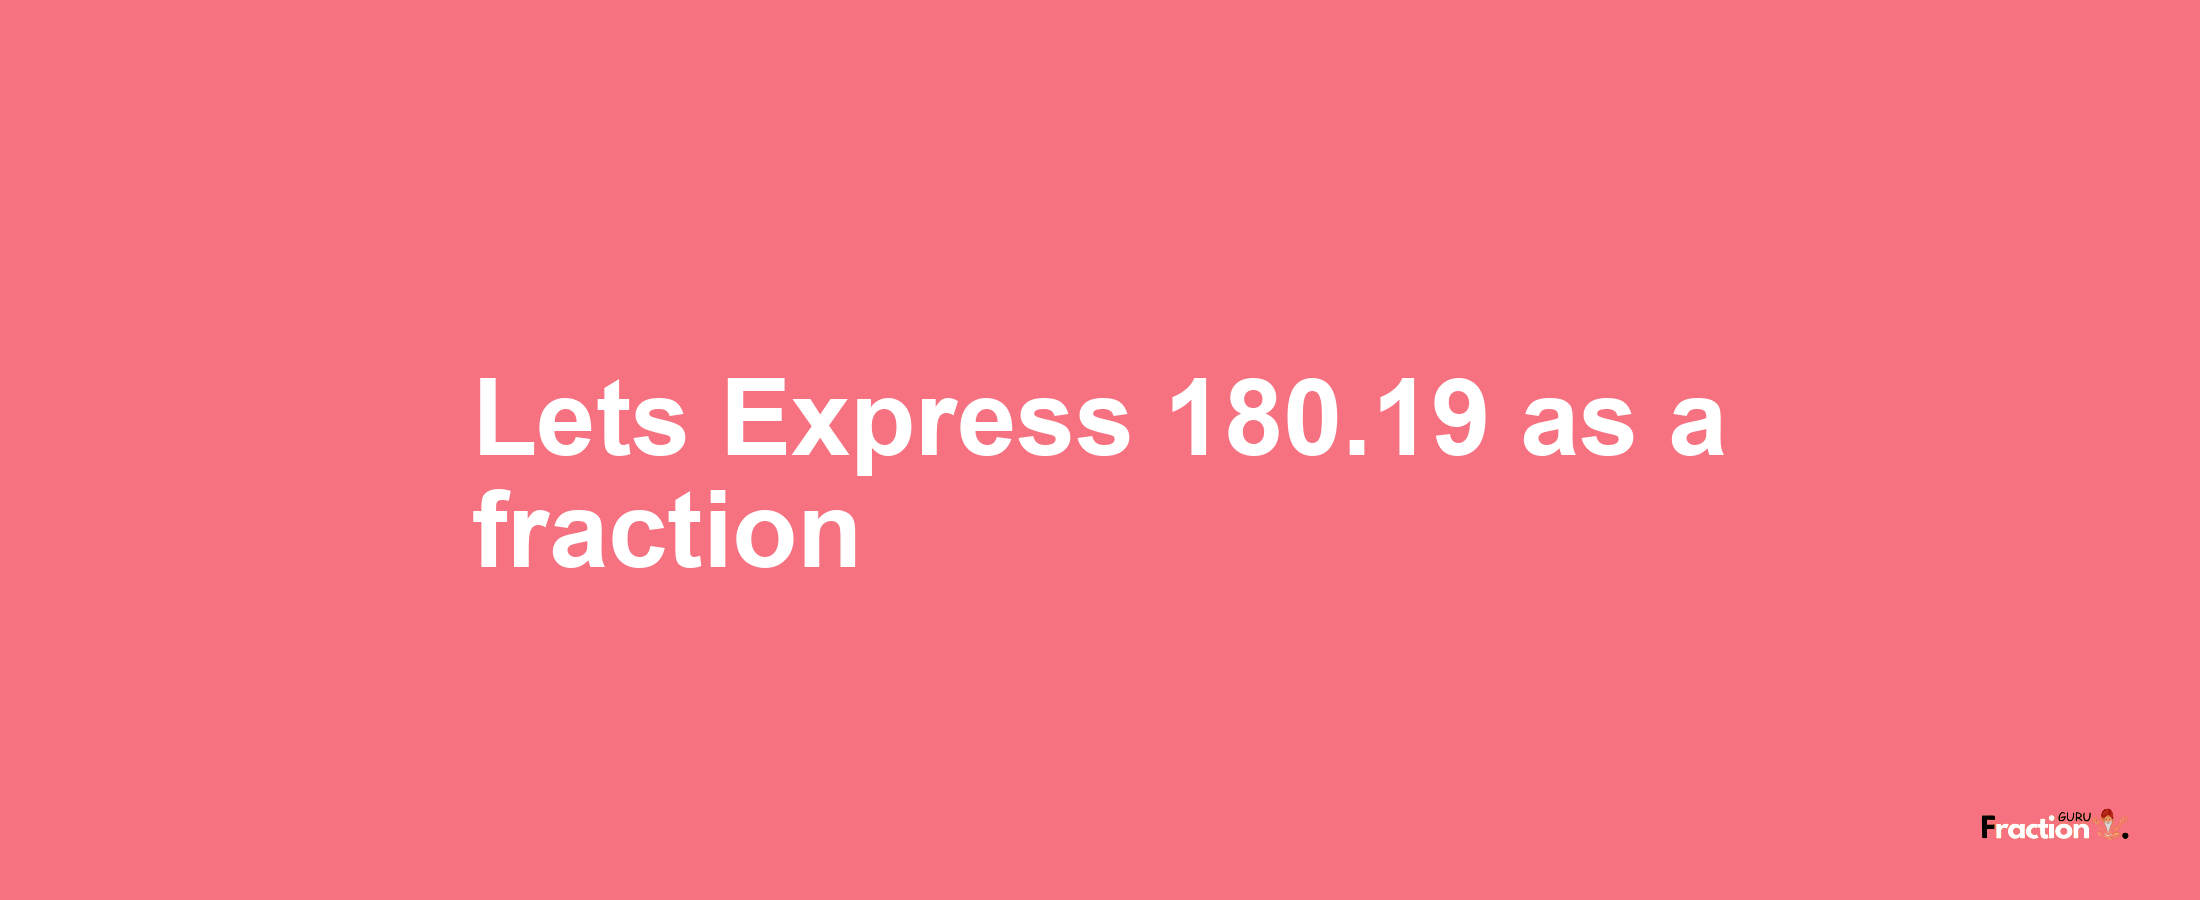 Lets Express 180.19 as afraction